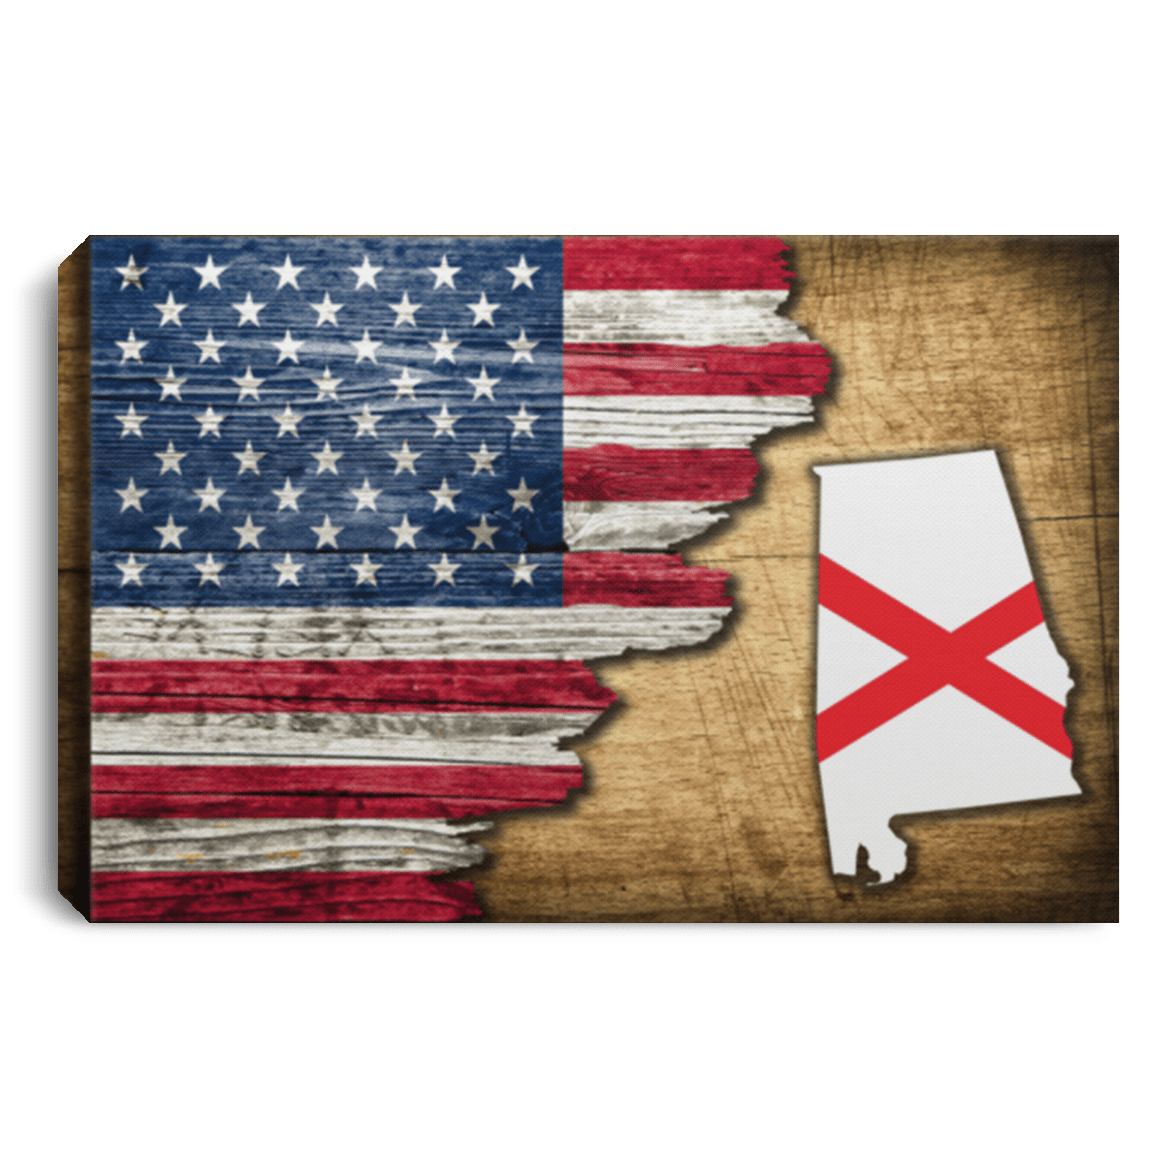 United States/Alabama Flag Ripped Effect 12X8 Inches Landscape Canvas .75In Frame